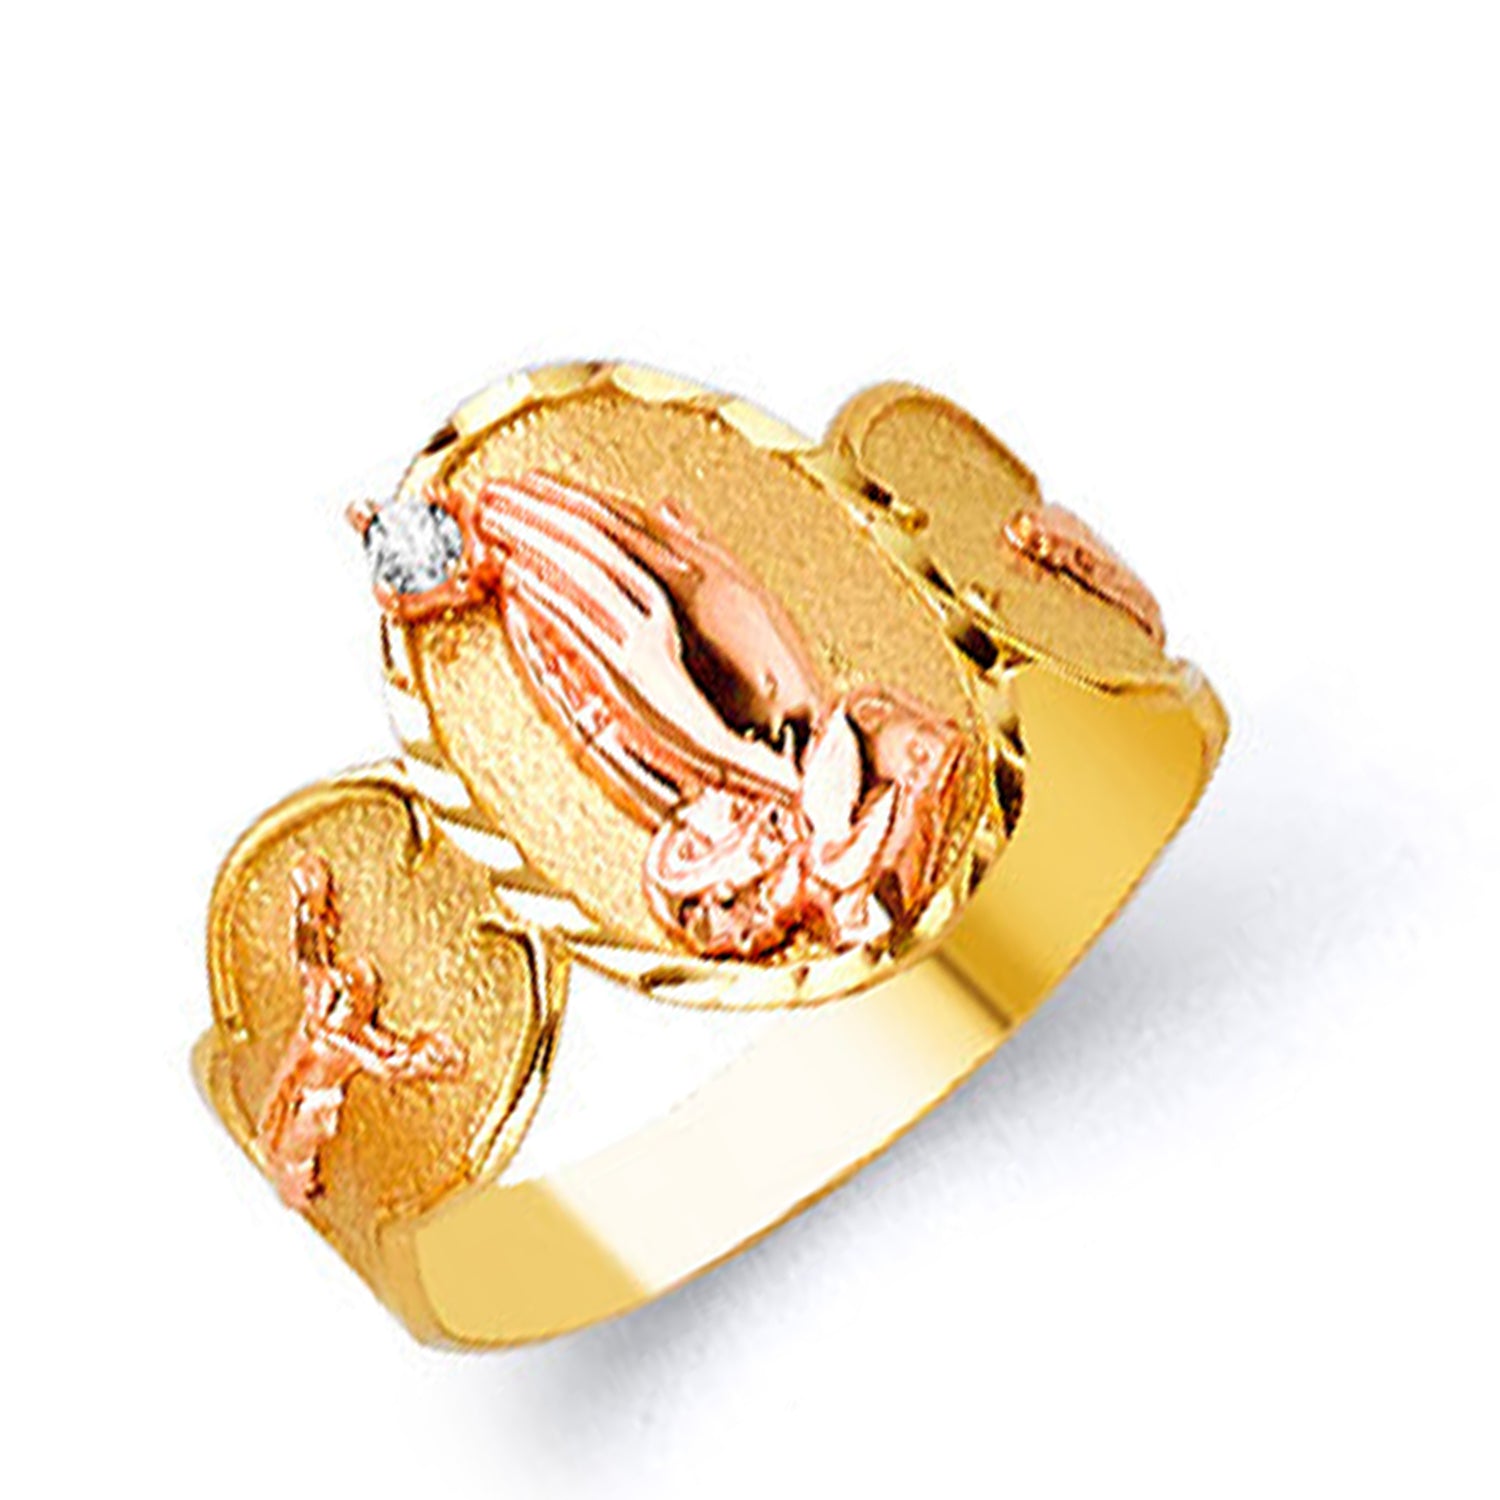 Artistic Angel Motif Ring in Solid Gold 